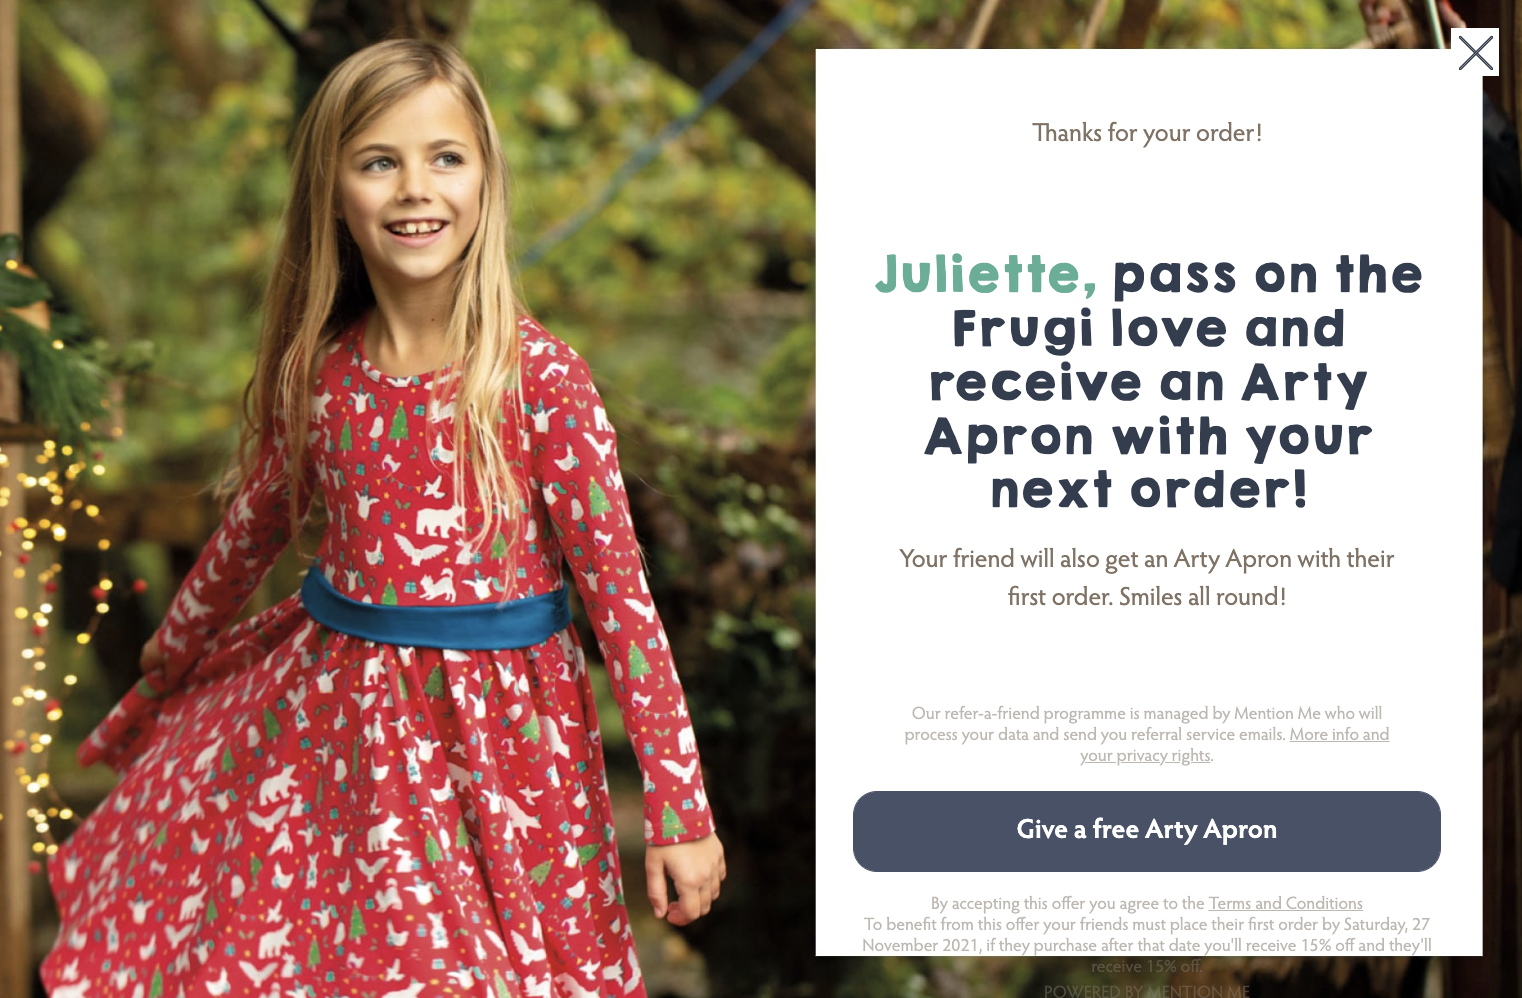 Frugi's referral offer for a free apron last Black Friday